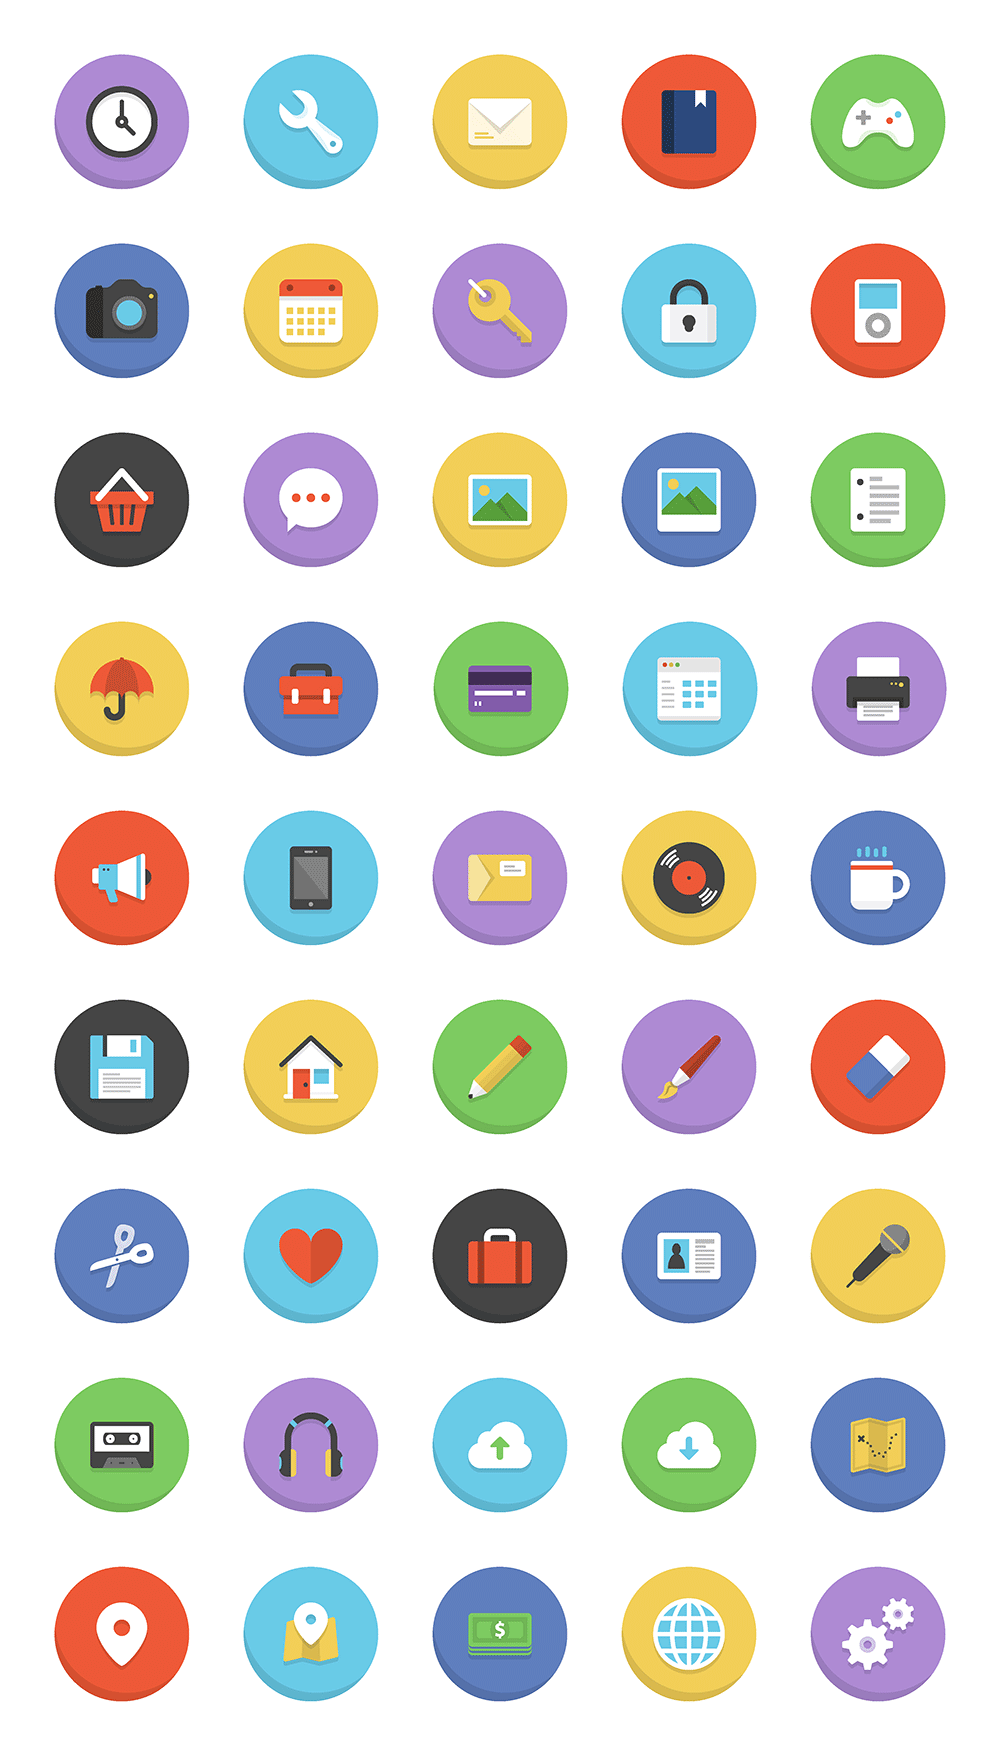 File:Cute-Ball-Favorites-icon.png - Wikimedia Commons